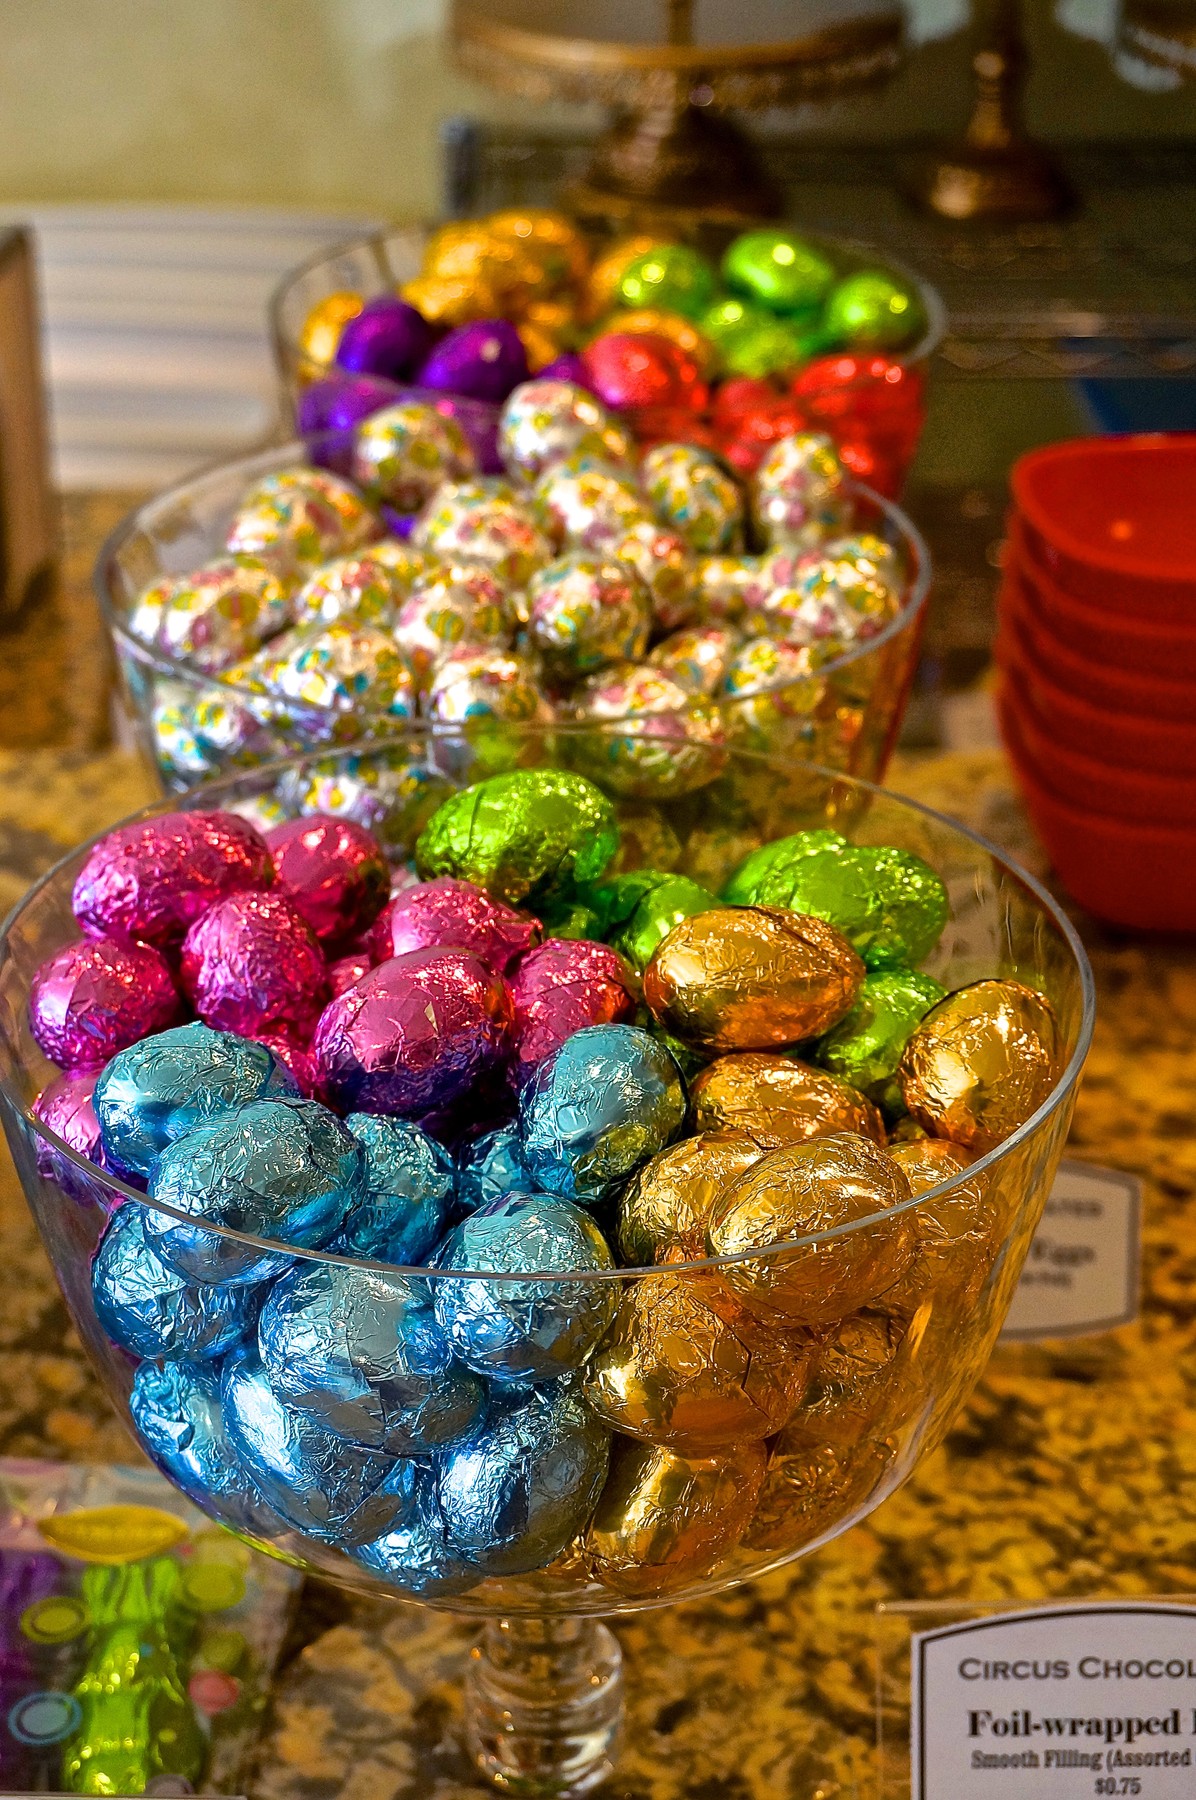 Foil Easter Eggs | Can you find where all the treats are hidden in Bronte; Photo Credit: OakvilleNews.Org | OakvilleNews.Org